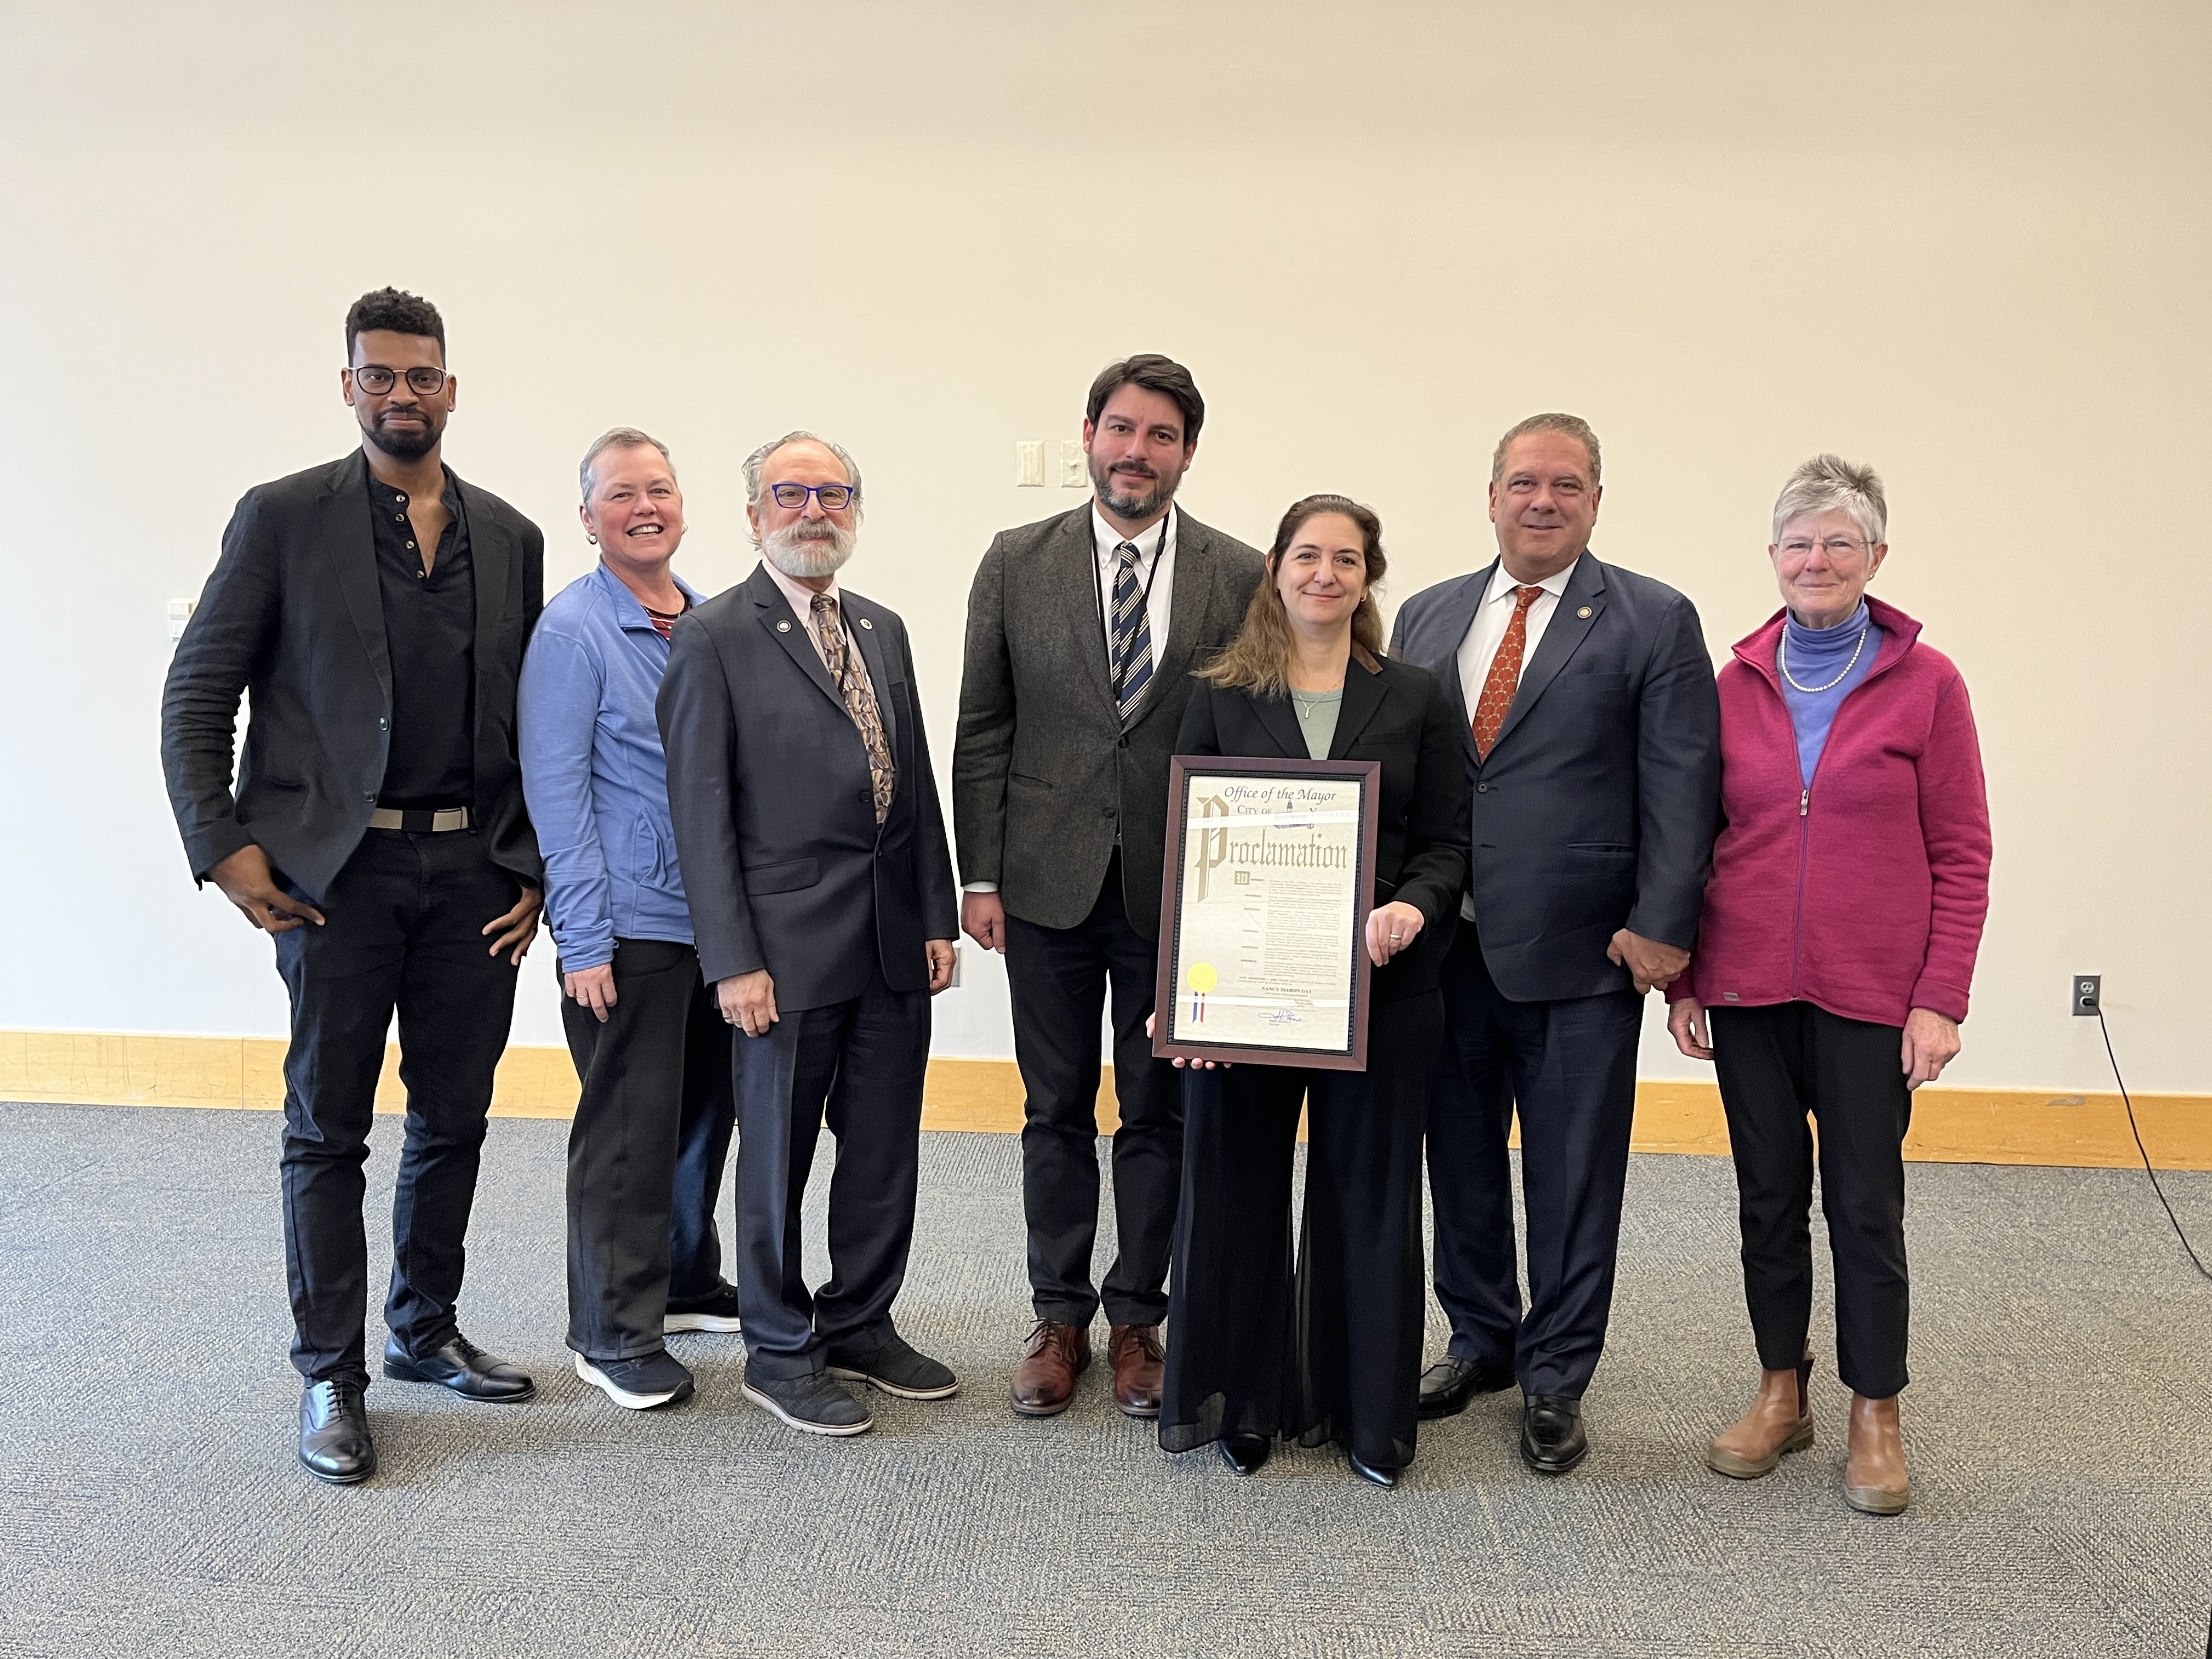 Trustees John Daily, Jr., Patricia Phelan, and Michael Sabatino, Library Director Jesse Montero, YPL Board President Nancy Maron, Mayor Mike Spano, and Jean Currie with award proclamation